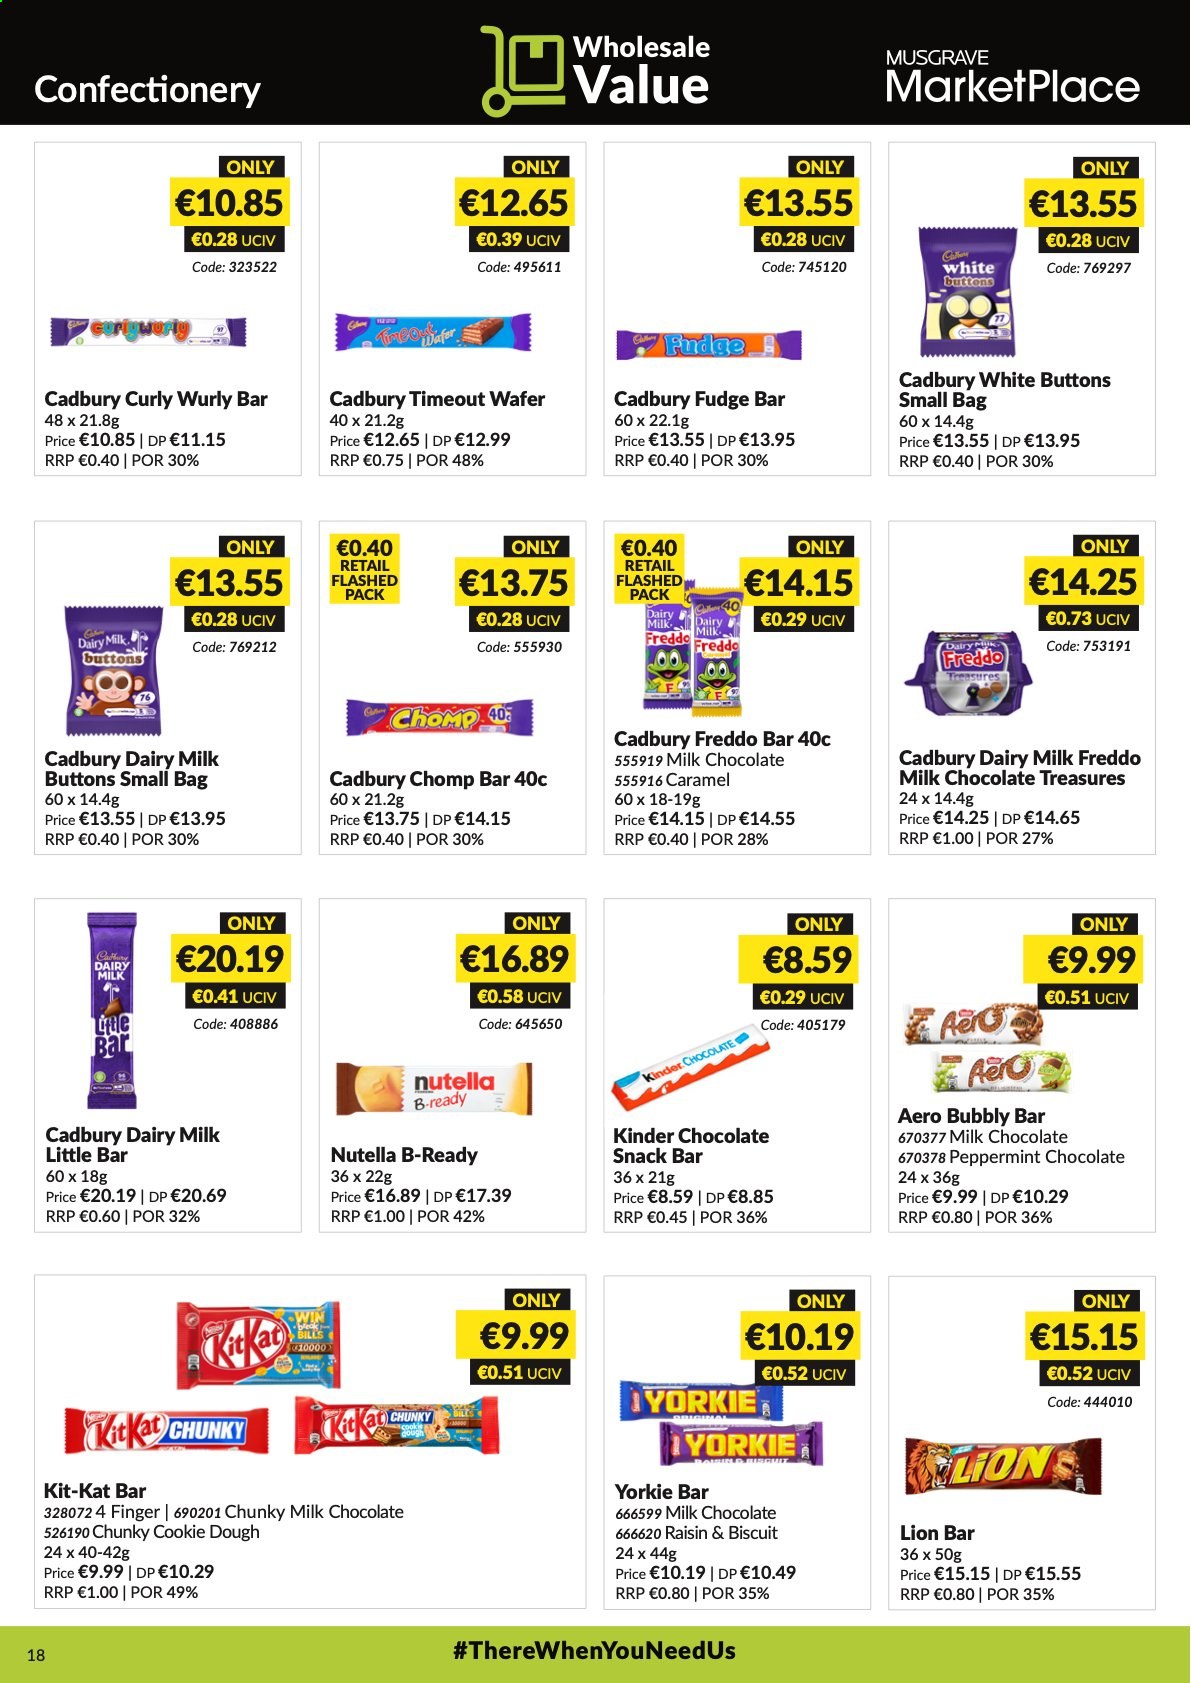 thumbnail - MUSGRAVE Market Place offer  - 09.05.2021 - 05.06.2021 - Sales products - cookie dough, fudge, milk chocolate, wafers, Nutella, chocolate, snack, biscuit, Cadbury, Dairy Milk, snack bar, caramel. Page 18.